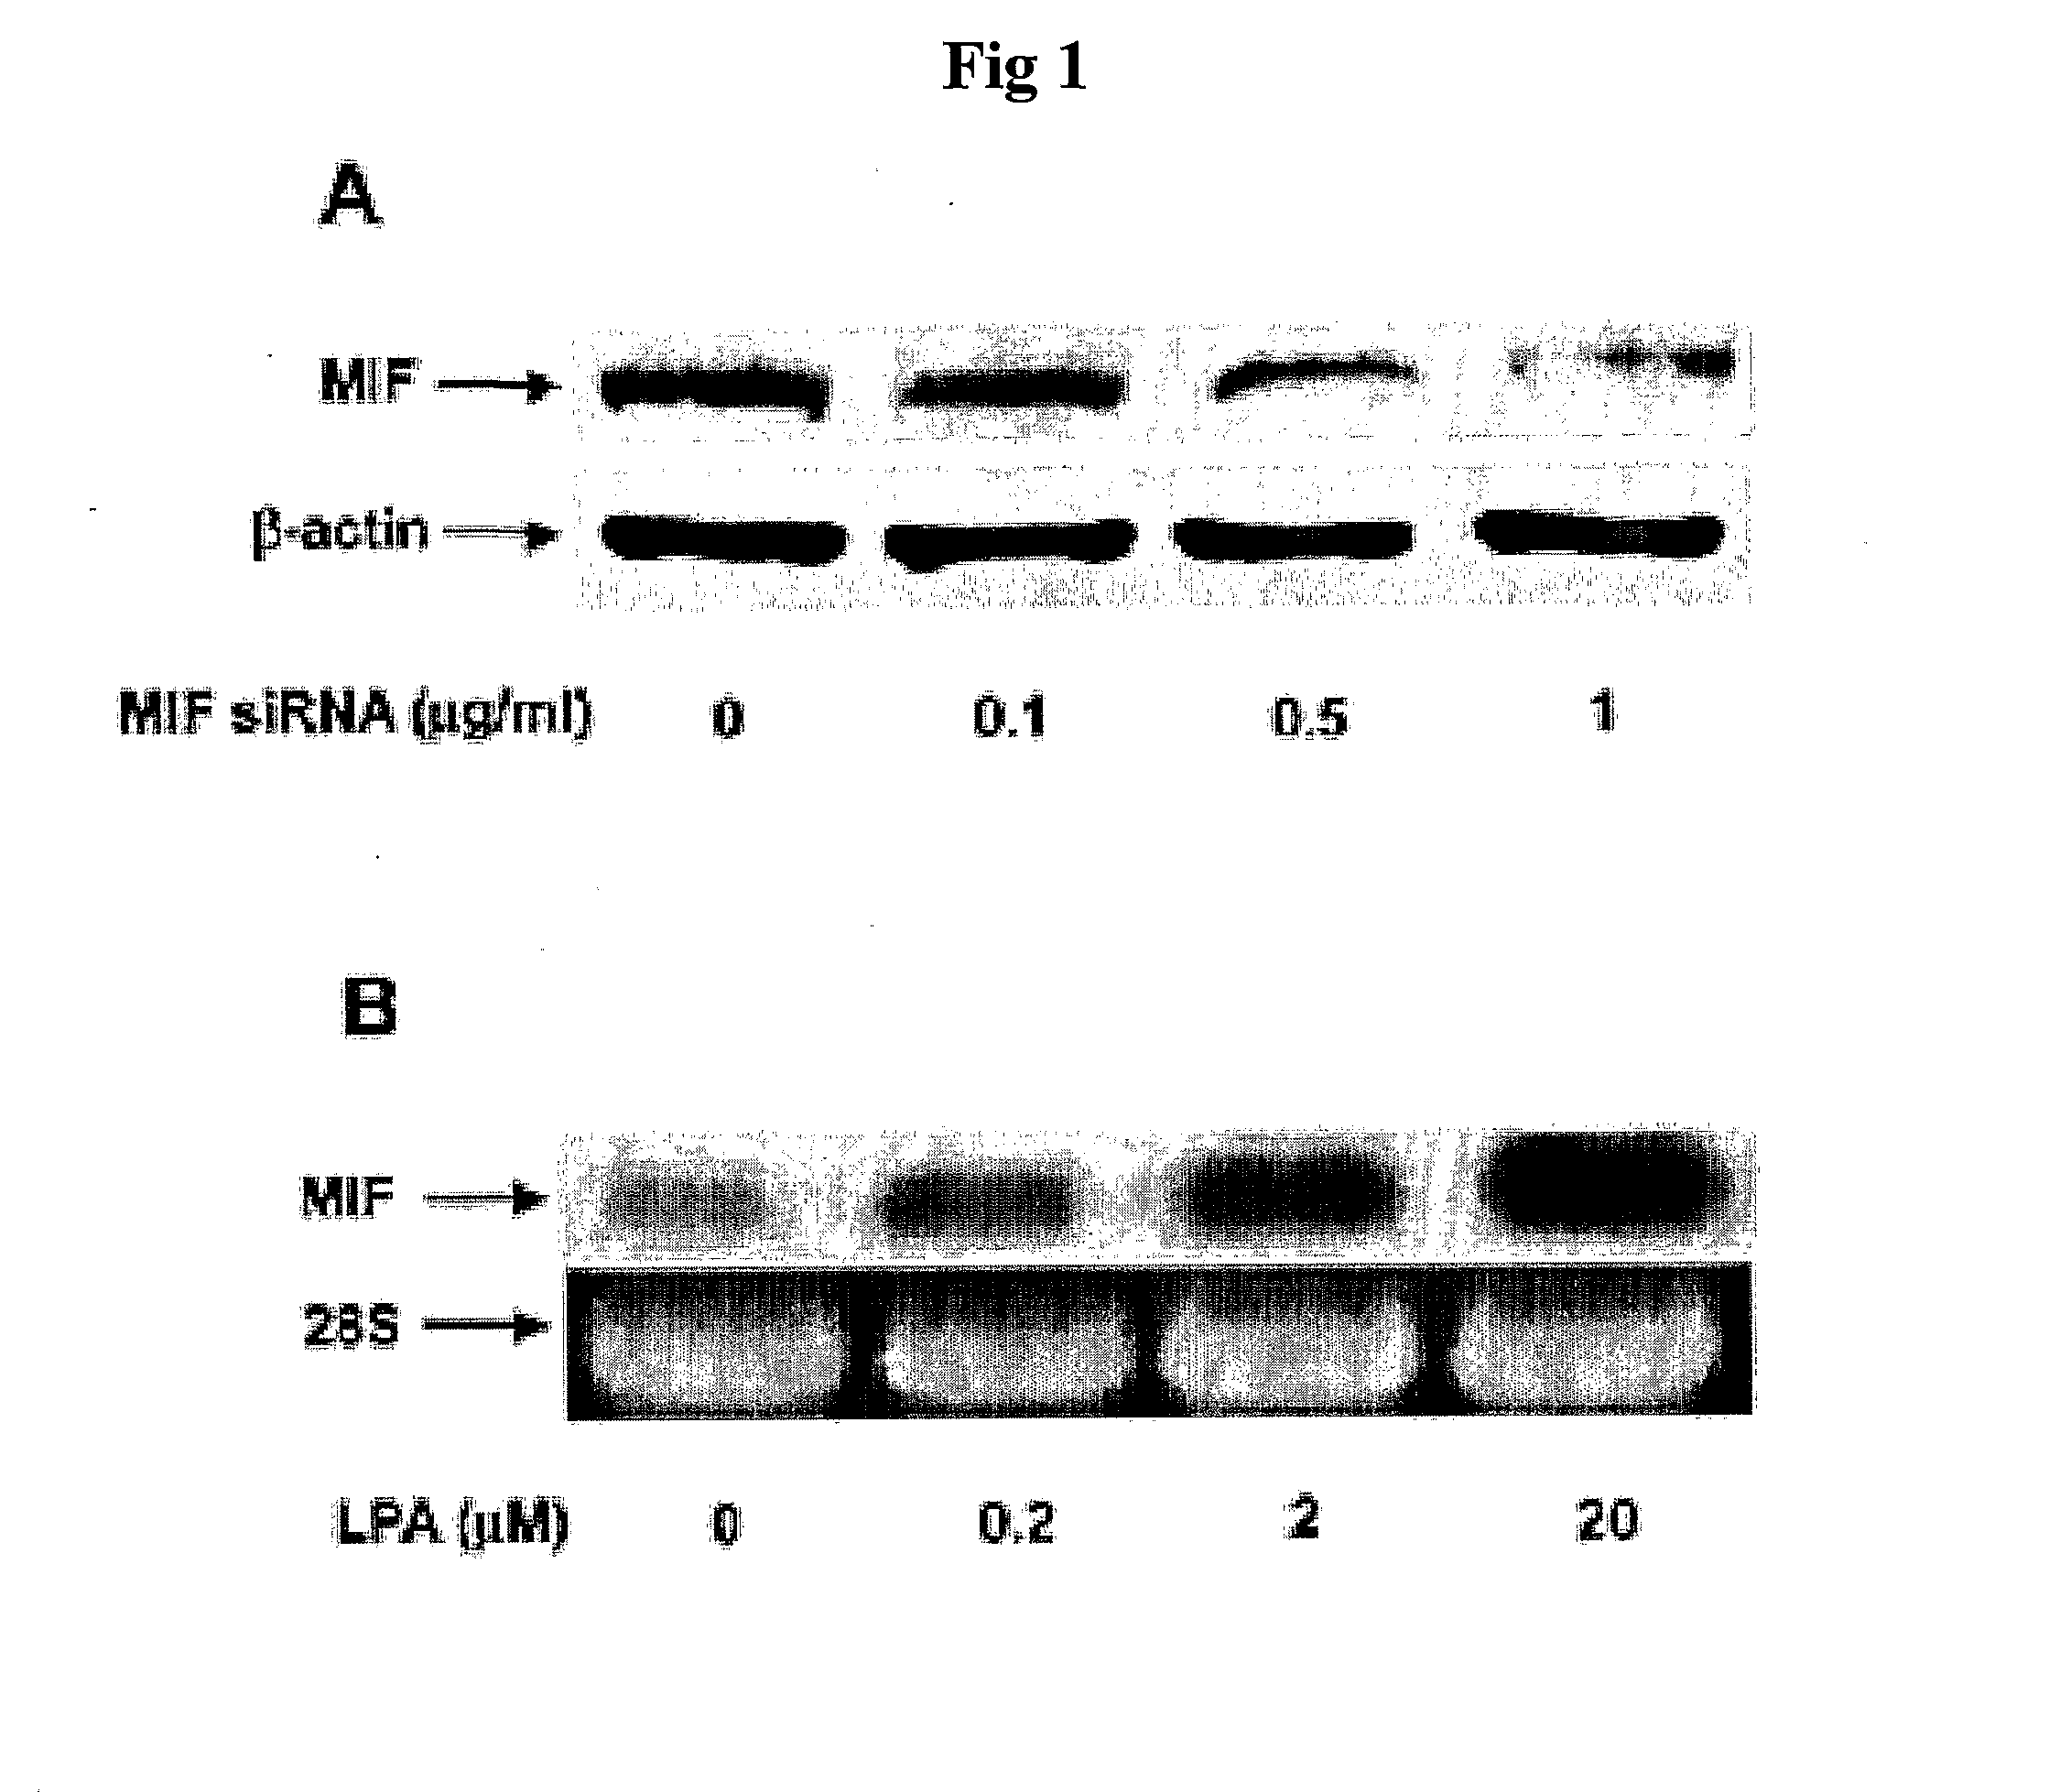 Pharmaceutical Agents for Preventing Metastasis of Cancer